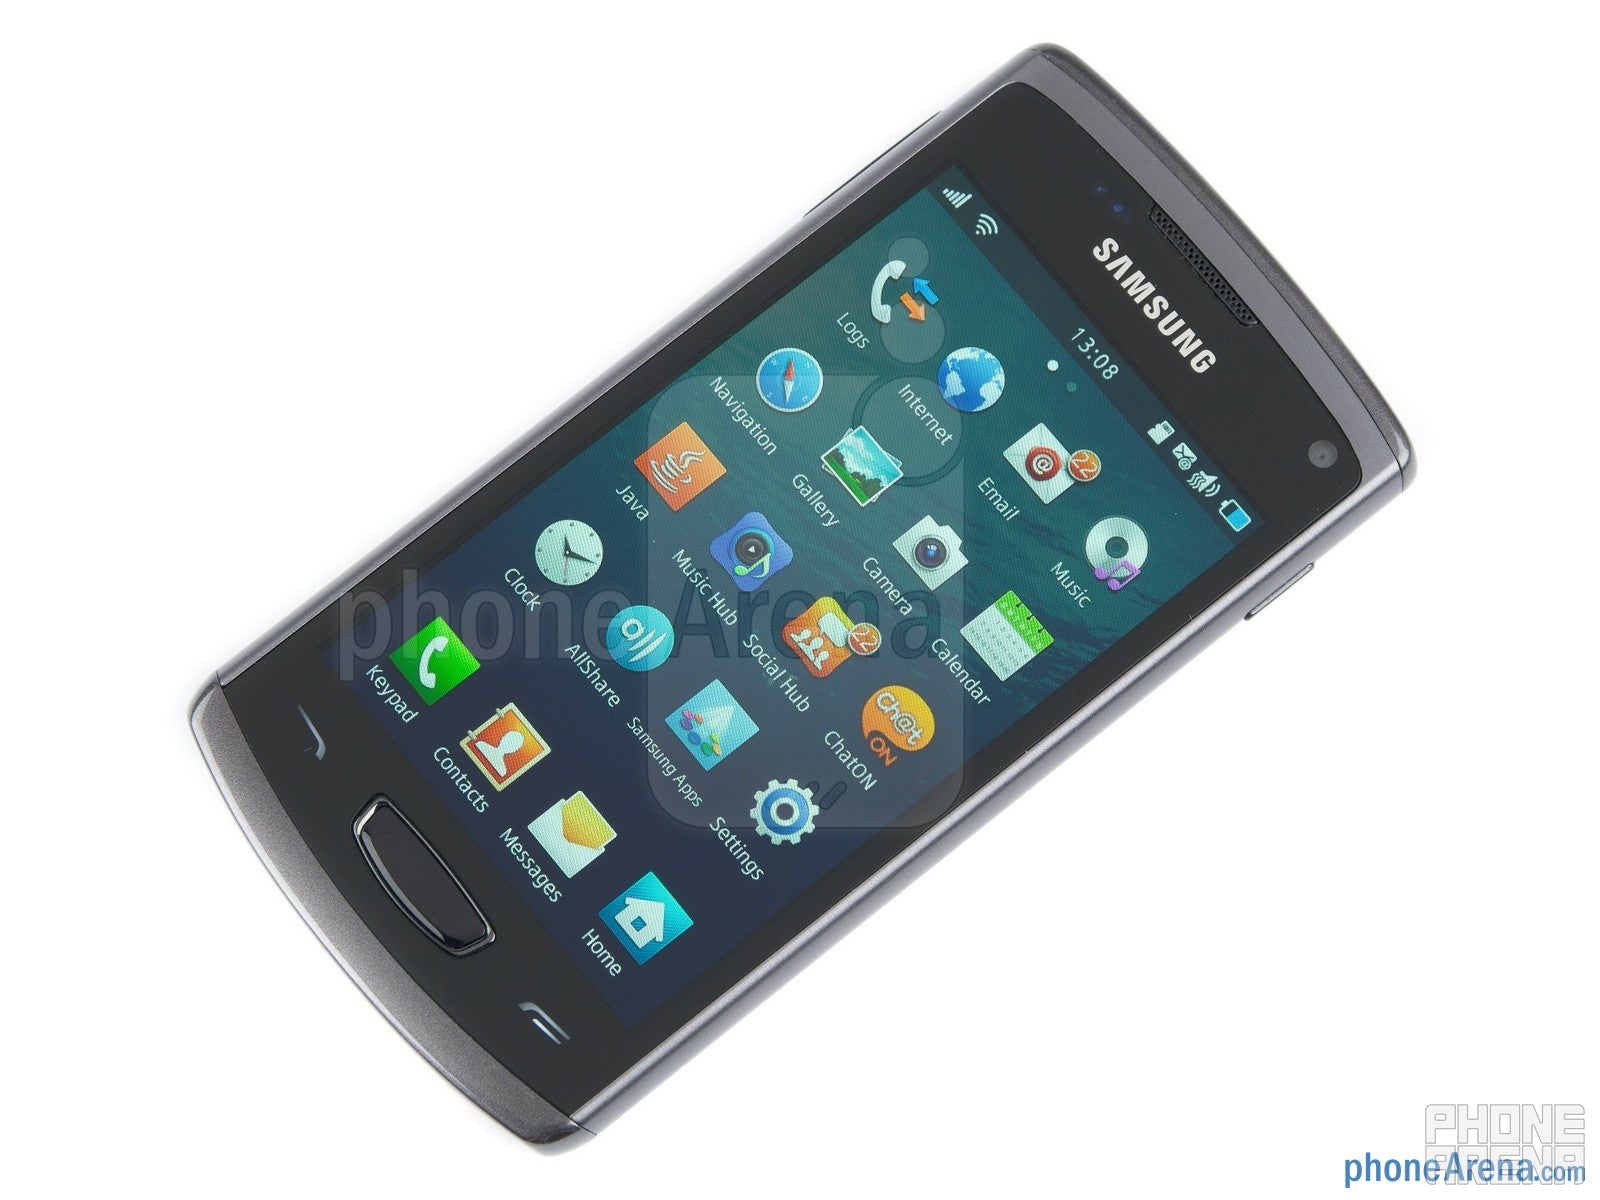 Samsung Wave 3 Review